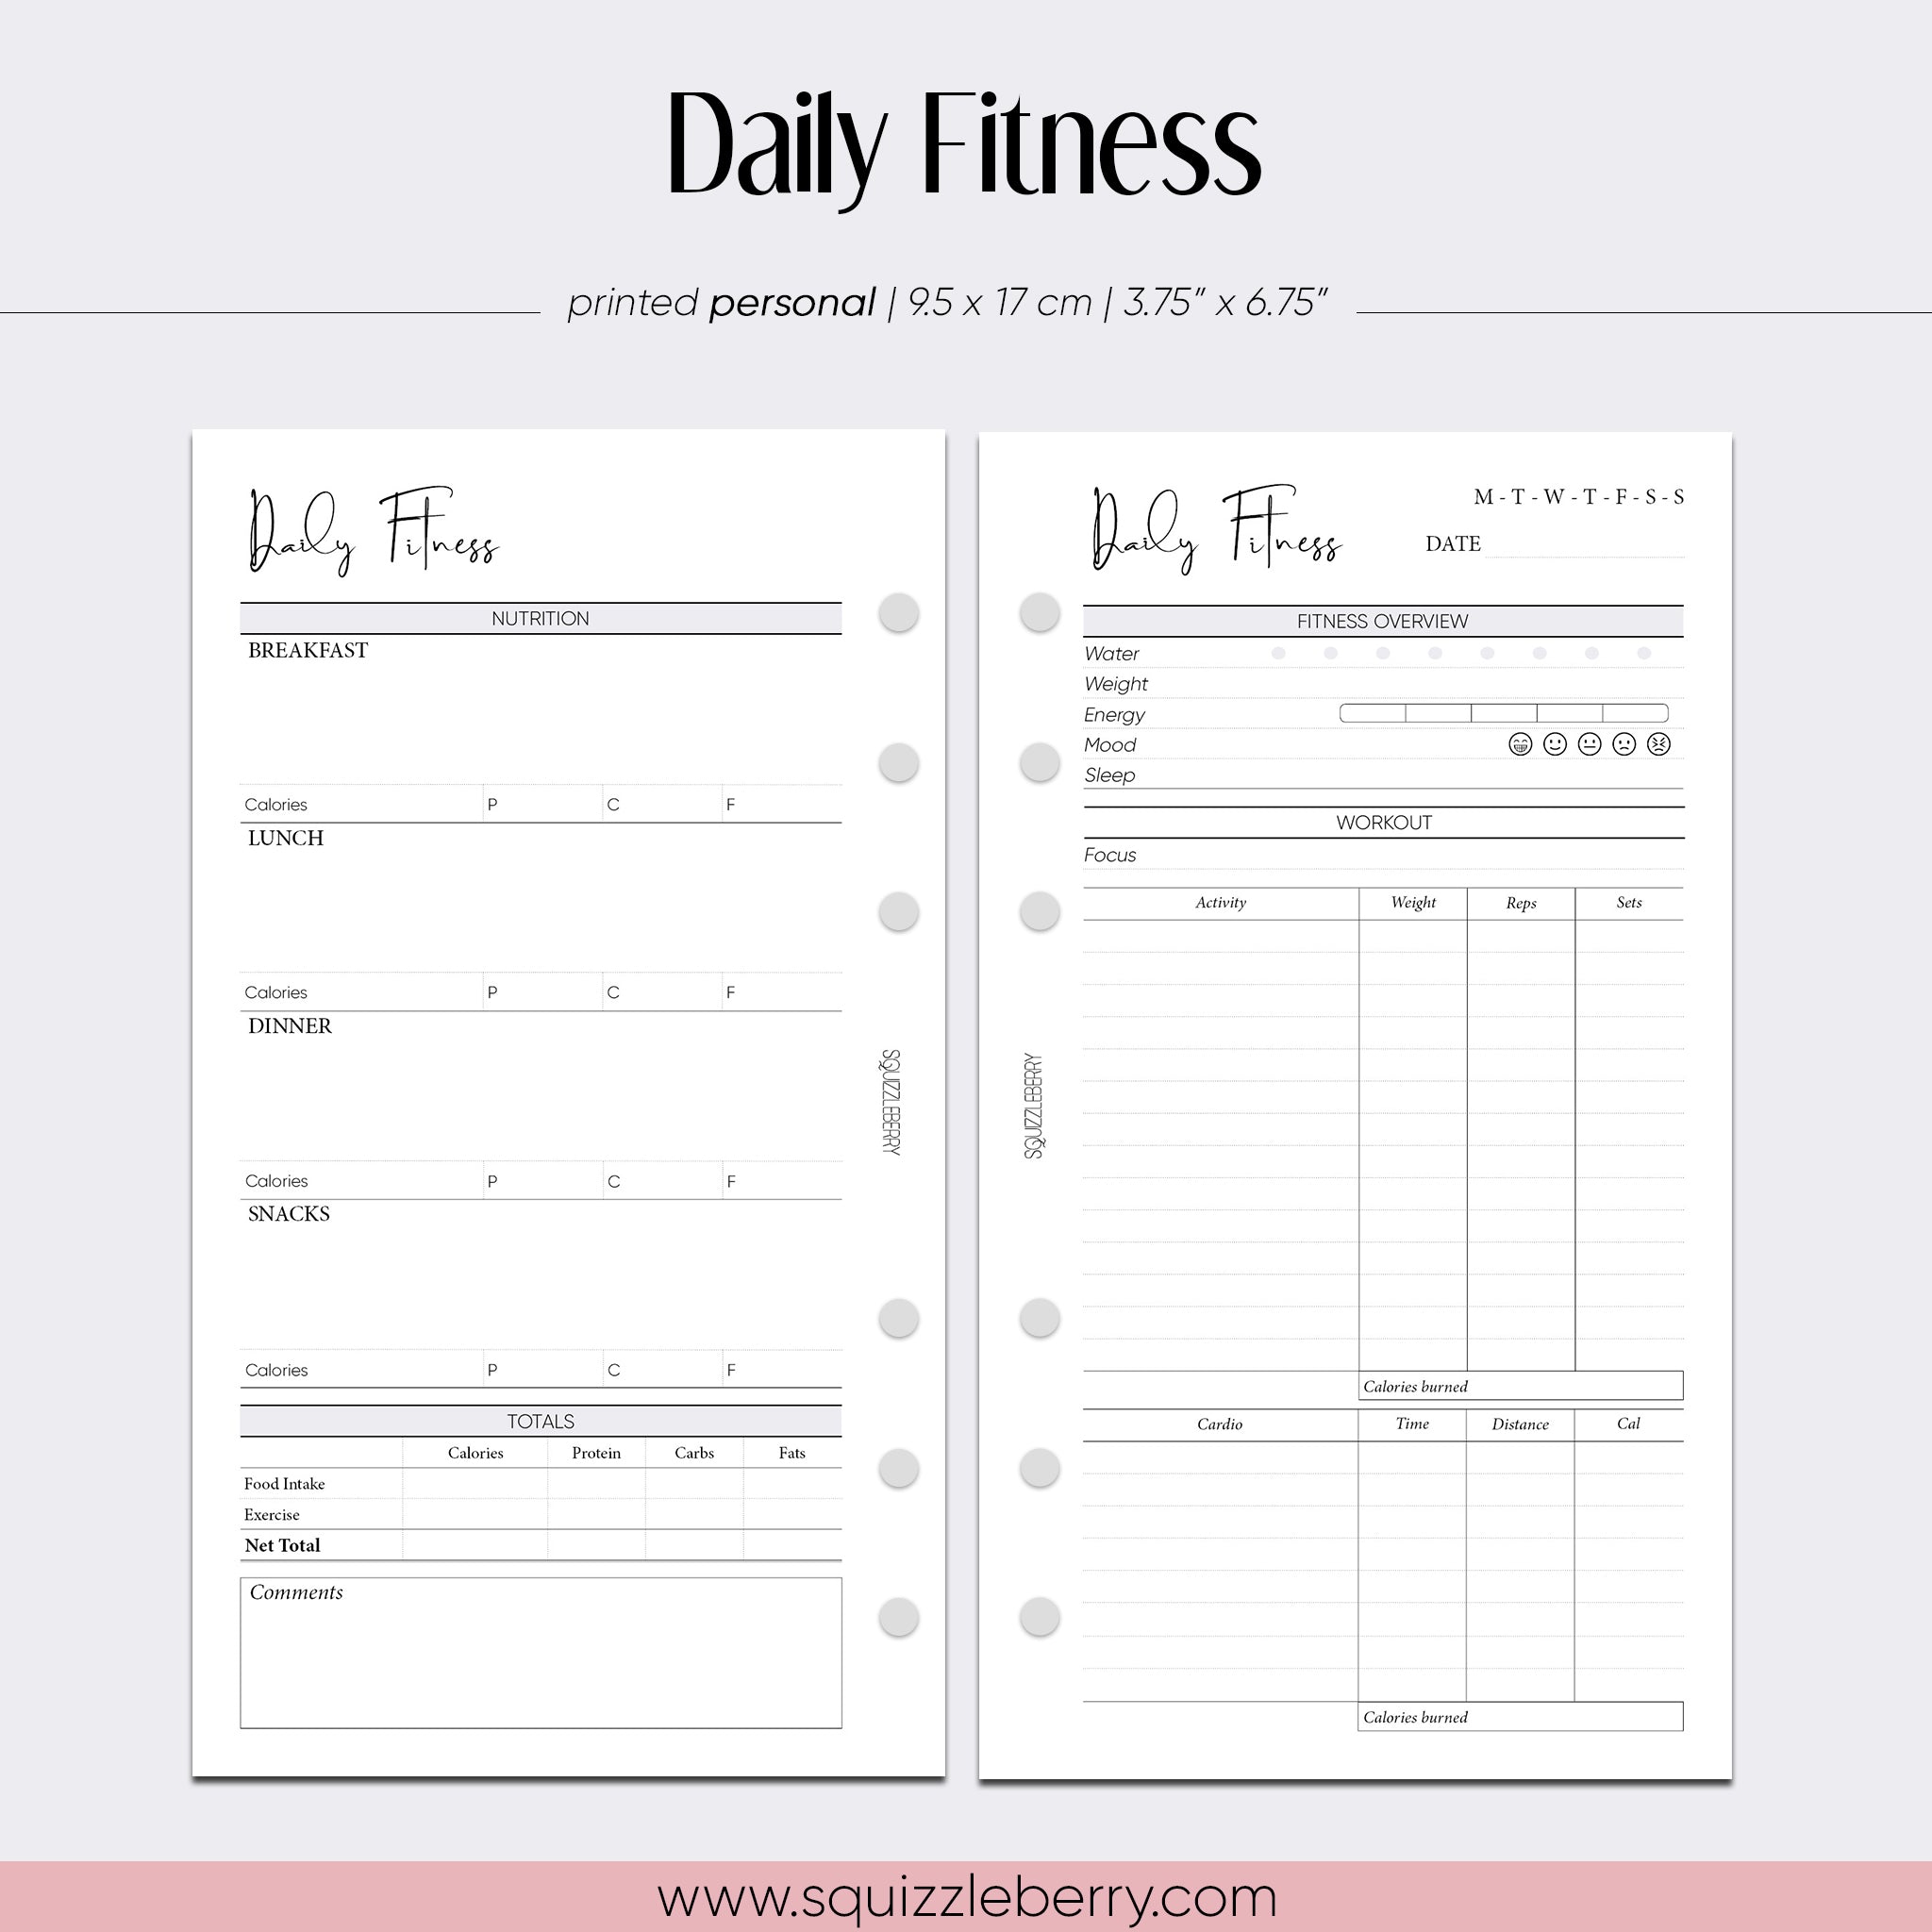 Daily Fitness - Personal | SquizzleBerry